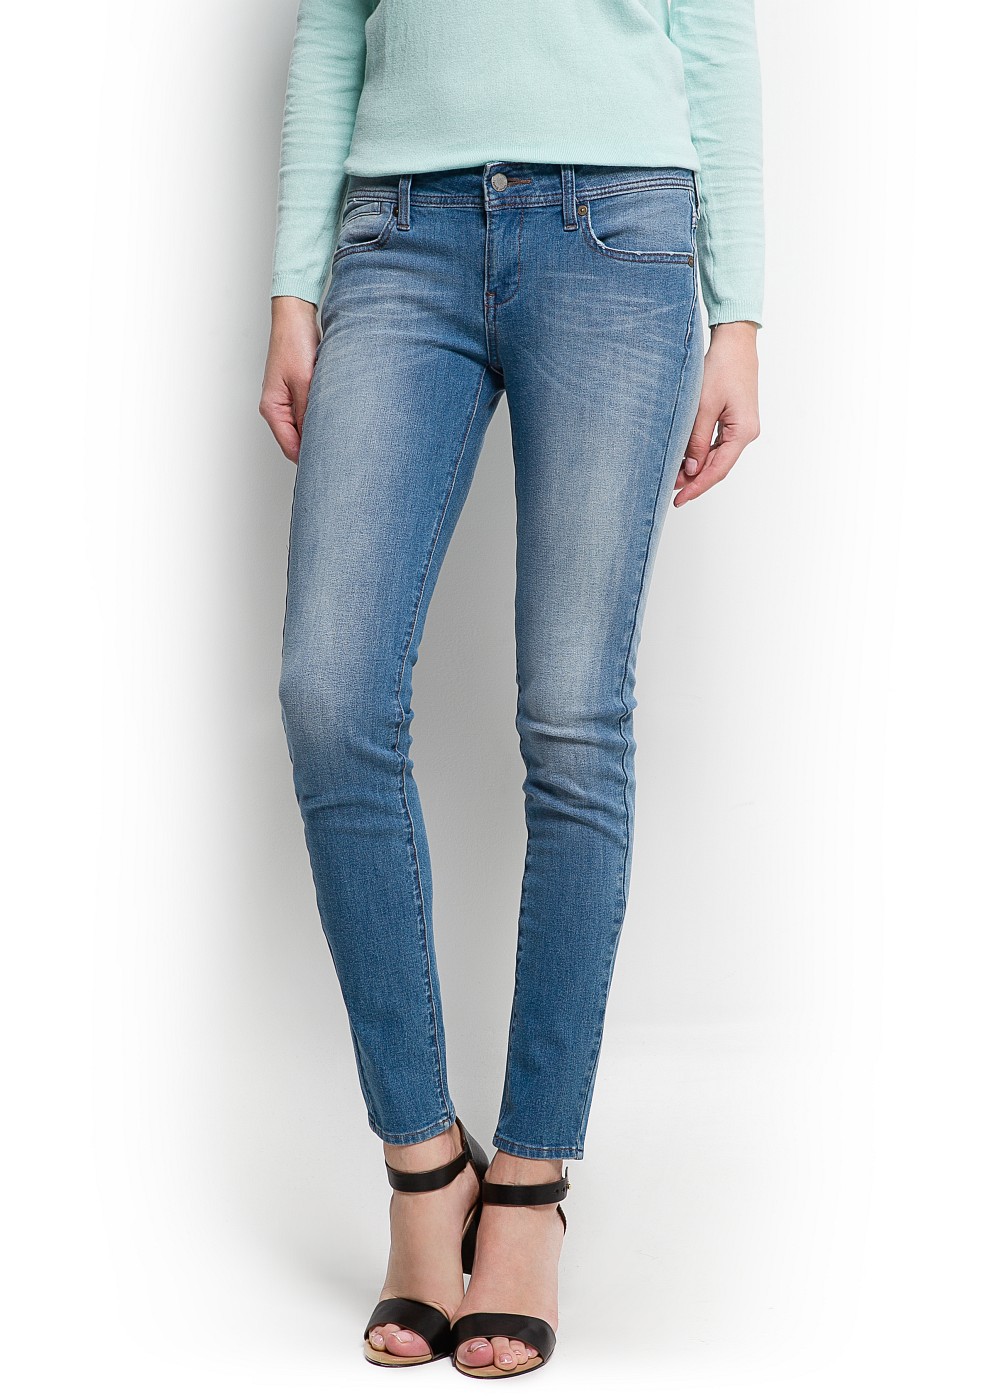 Lyst - Democracy Ab Technology Skinny Jeans in Blue